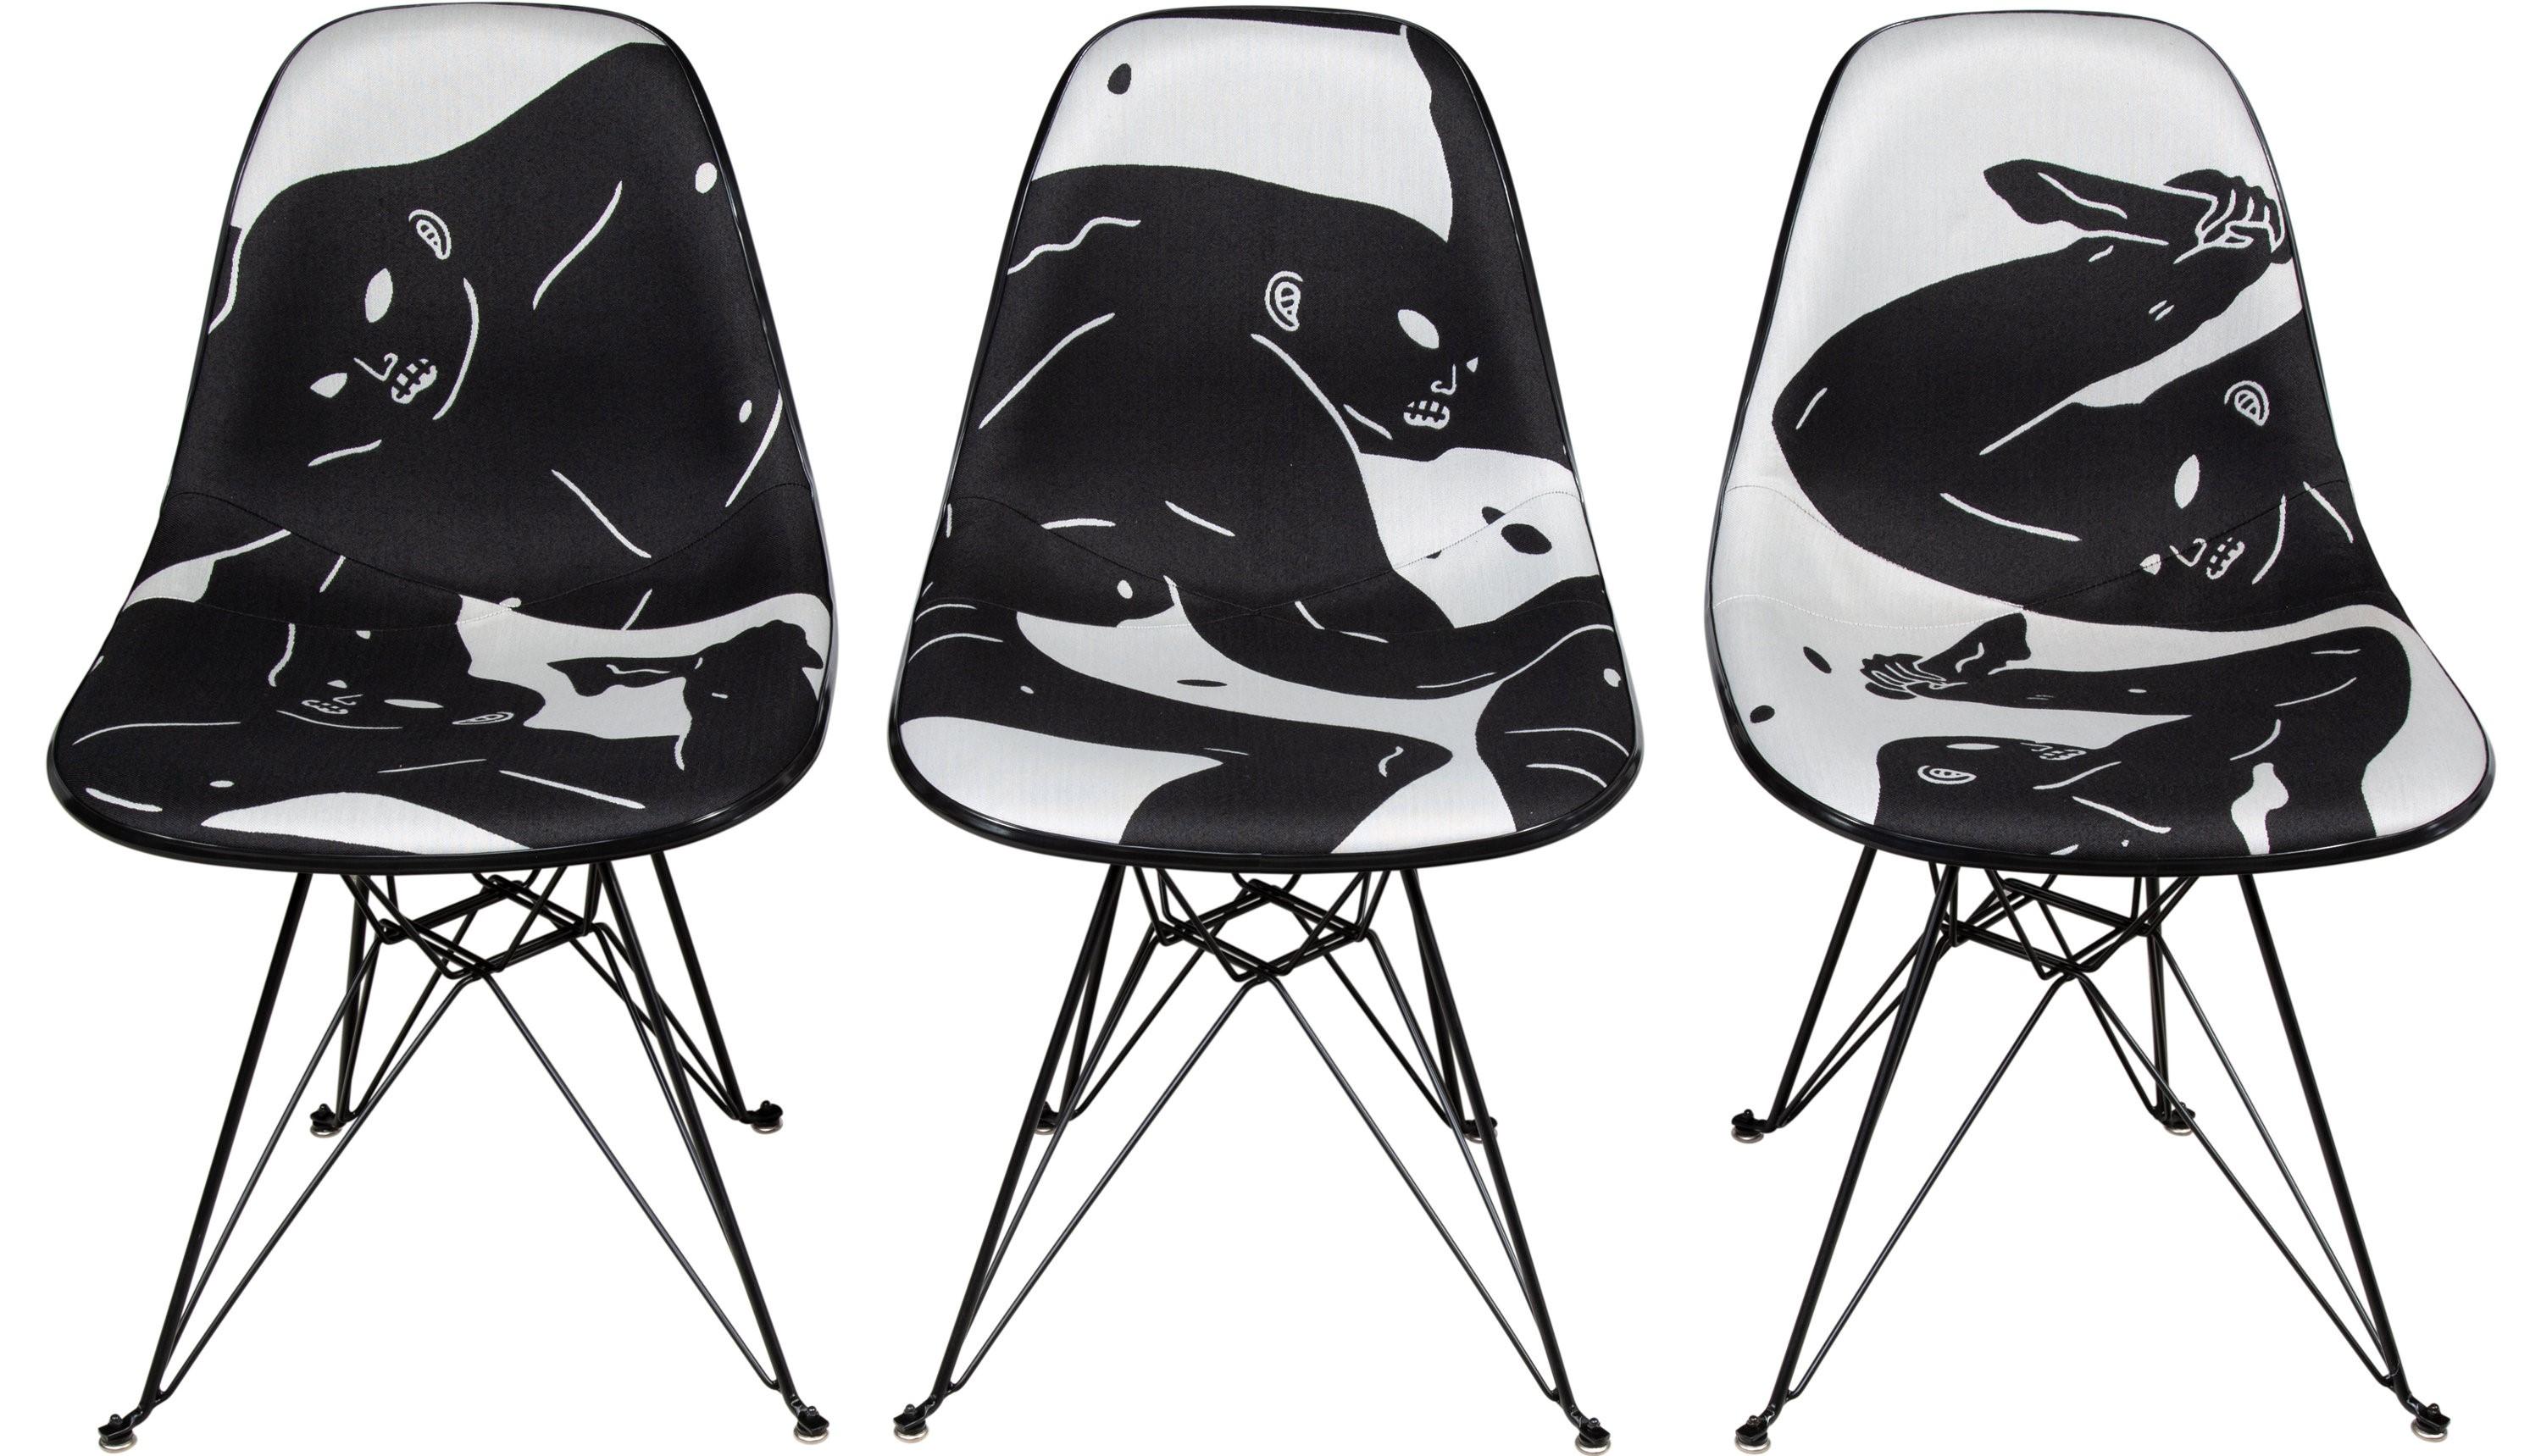 Cleon Peterson Abstract Sculpture - Museum of Contemporary Art Denver X Modernica Full Set of 3 Chairs Henry Eames